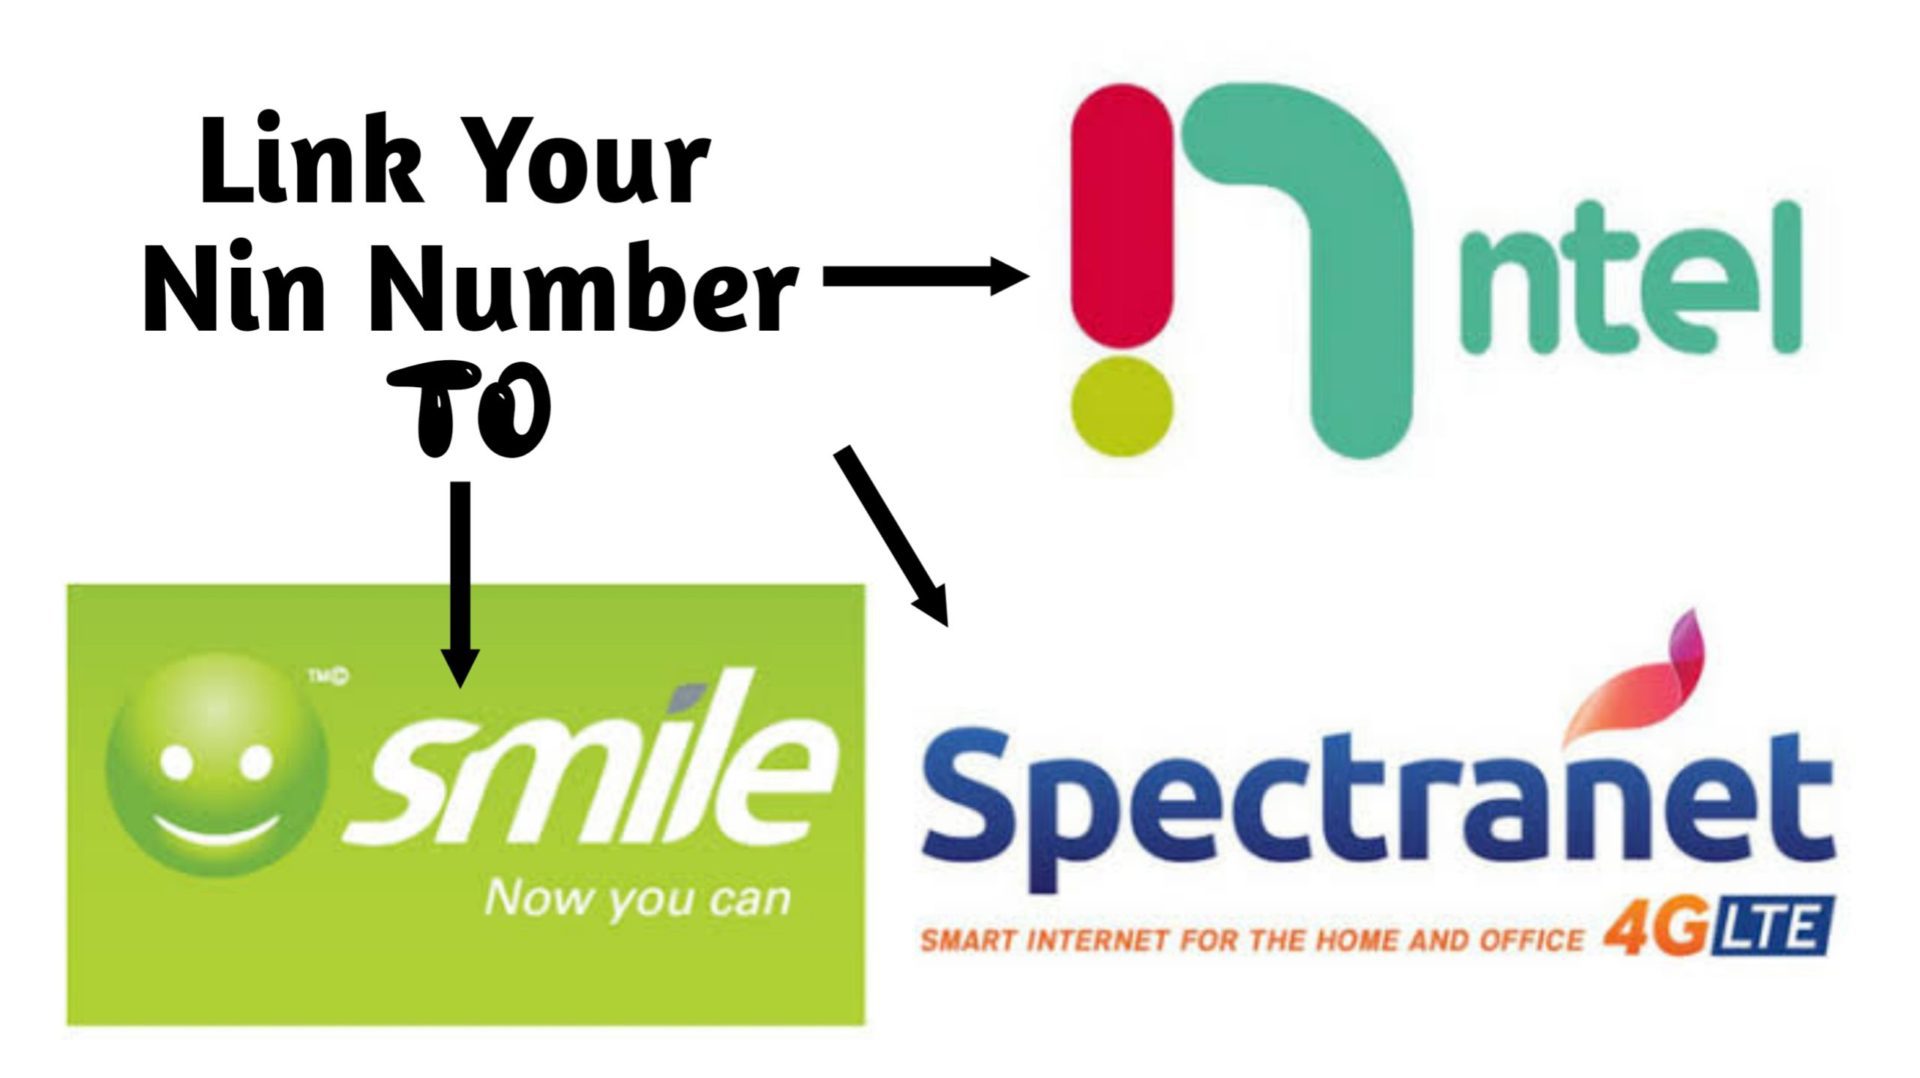 How To Link Nin To Ntel, Smile & Spectranet Simcards